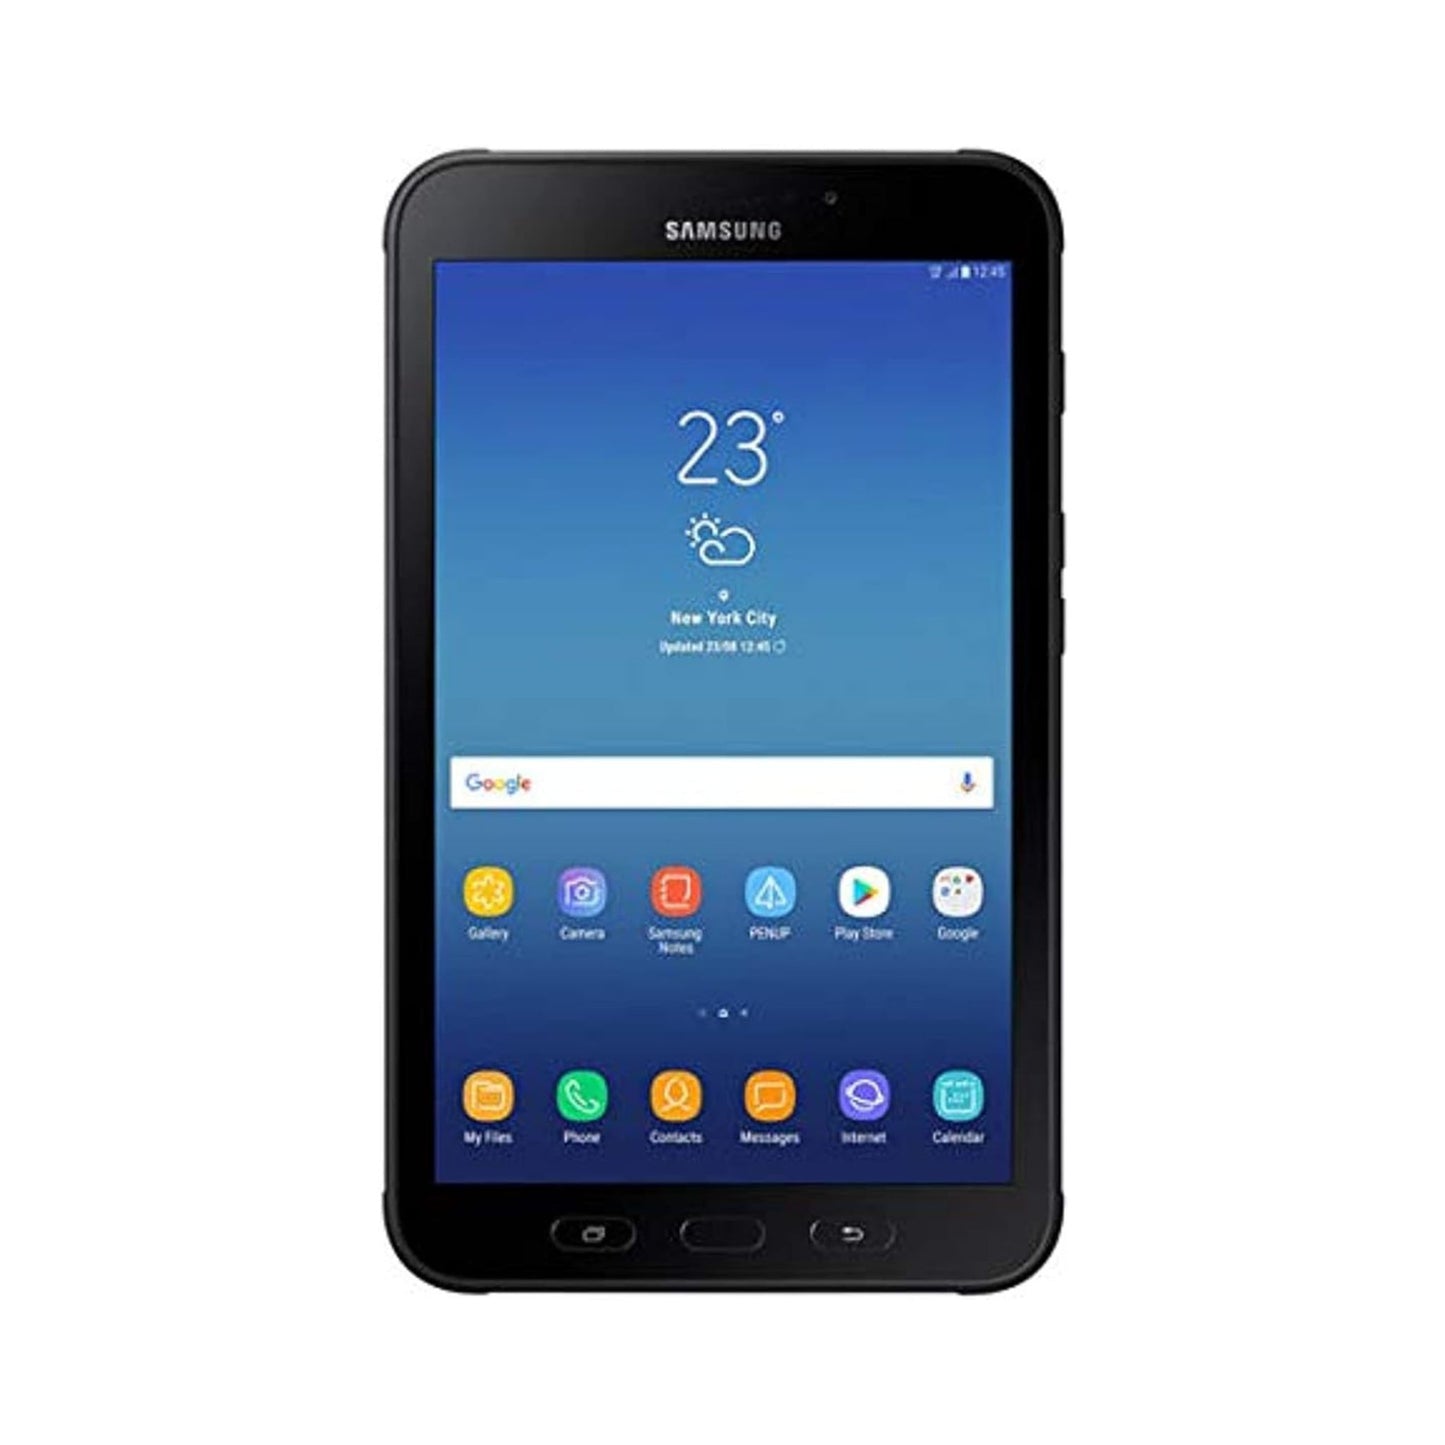 Galaxy Tab Active 2 (3GB RAM+16 GB ROM),4450 mAh Replaceable Battery with S pen Inculded_Black